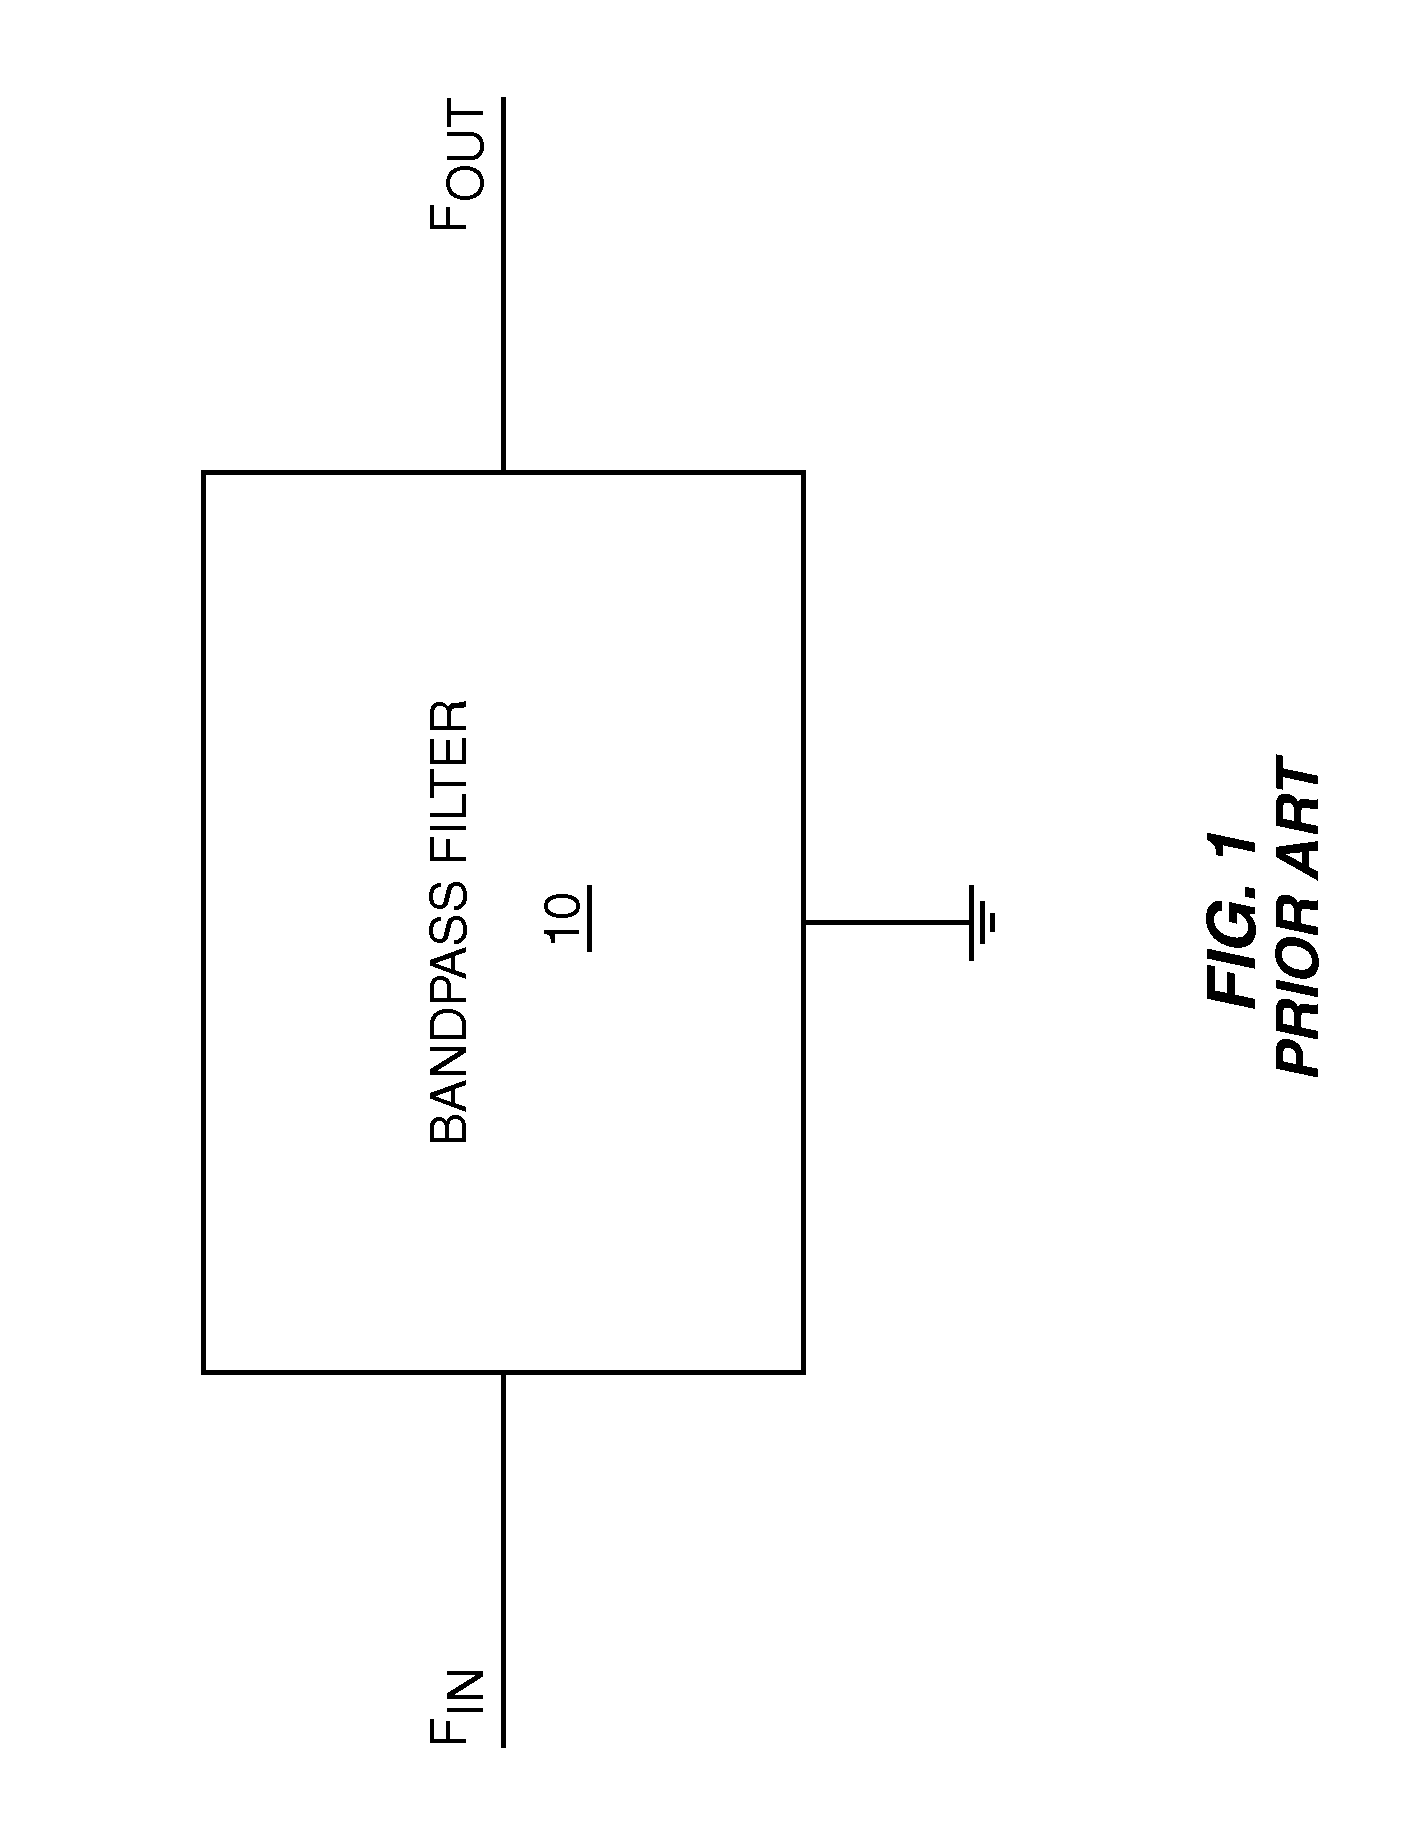 Radio frequency filter using intermediate frequency impedance translation